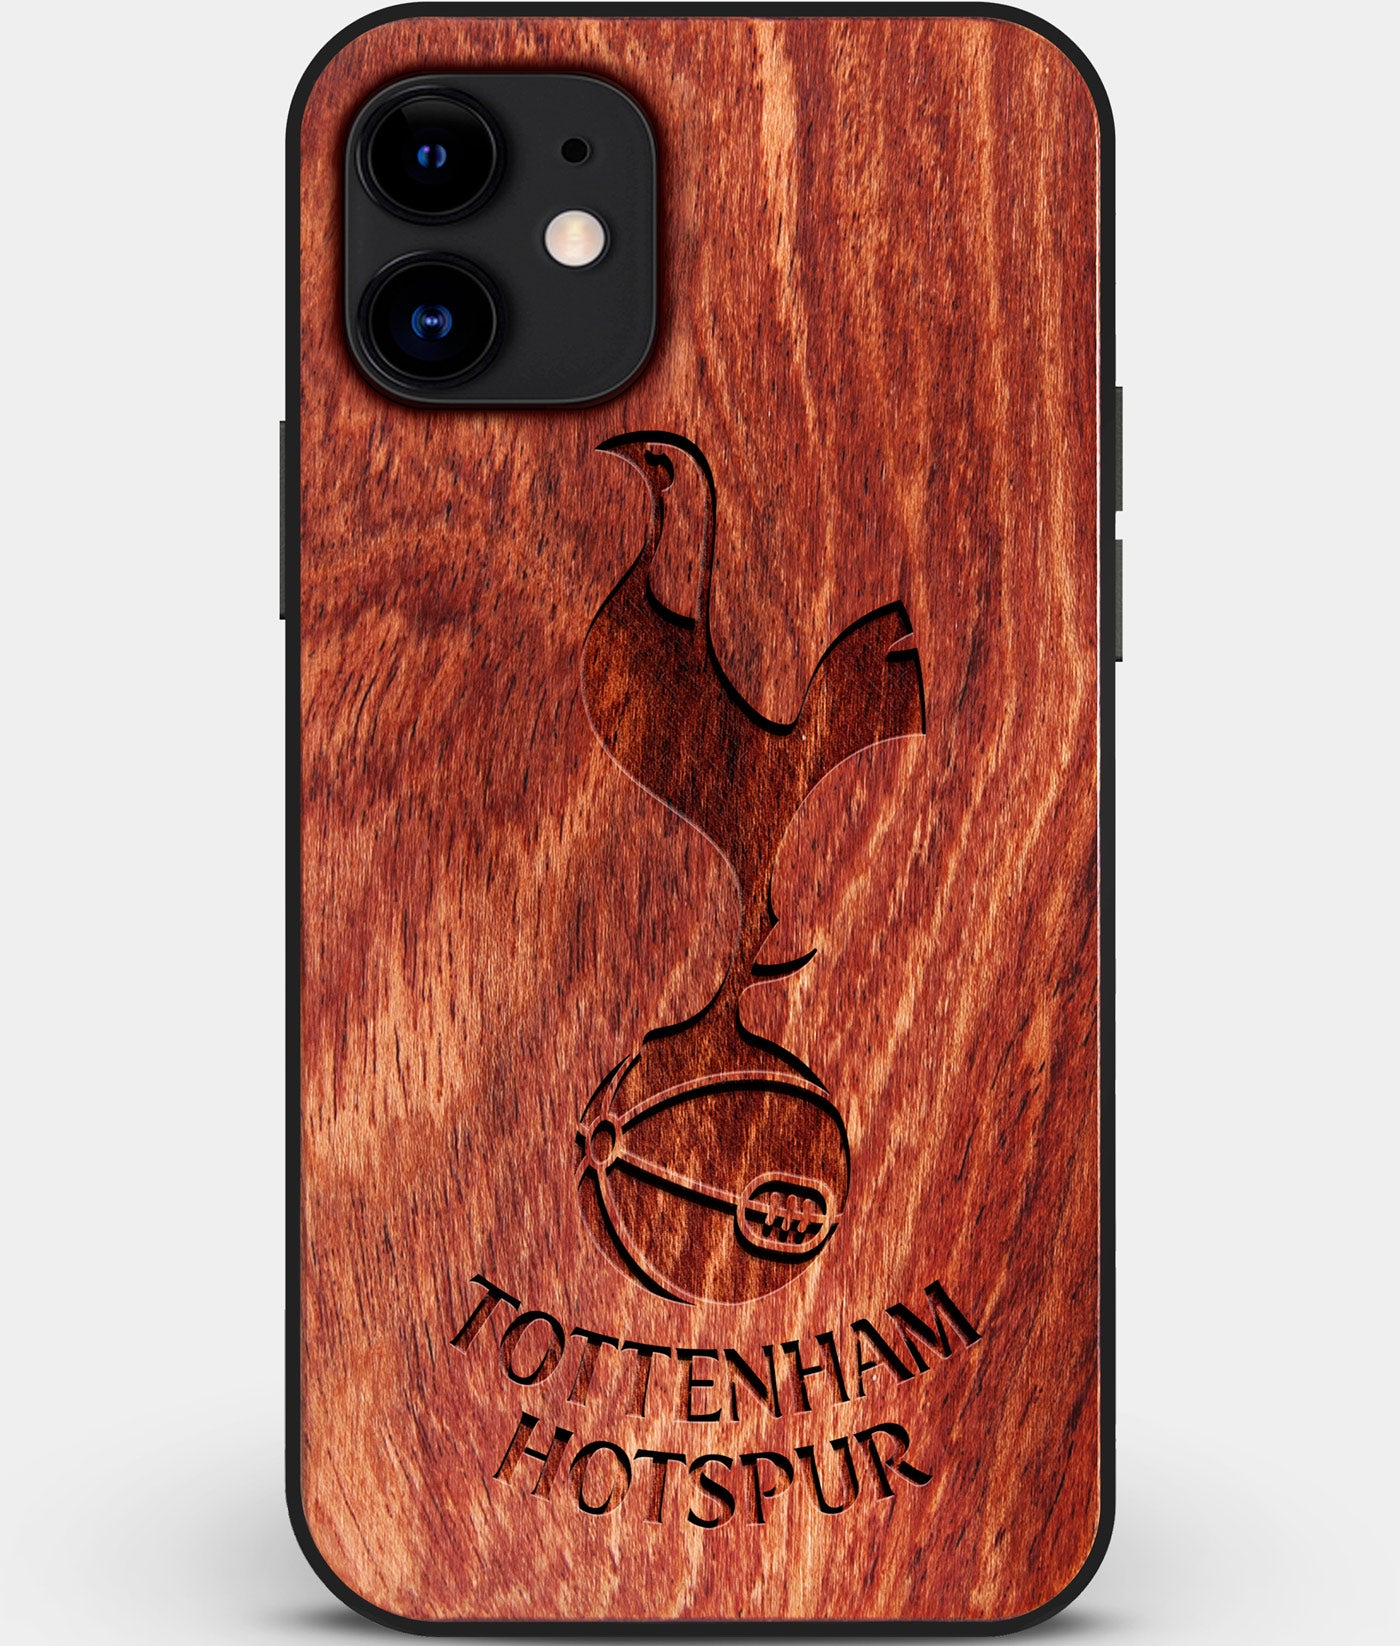 Custom Carved Wood Tottenham Hotspur F.C. iPhone 12 Mini Case | Personalized Mahogany Wood Tottenham Hotspur F.C. Cover, Birthday Gift, Gifts For Him, Monogrammed Gift For Fan | by Engraved In Nature